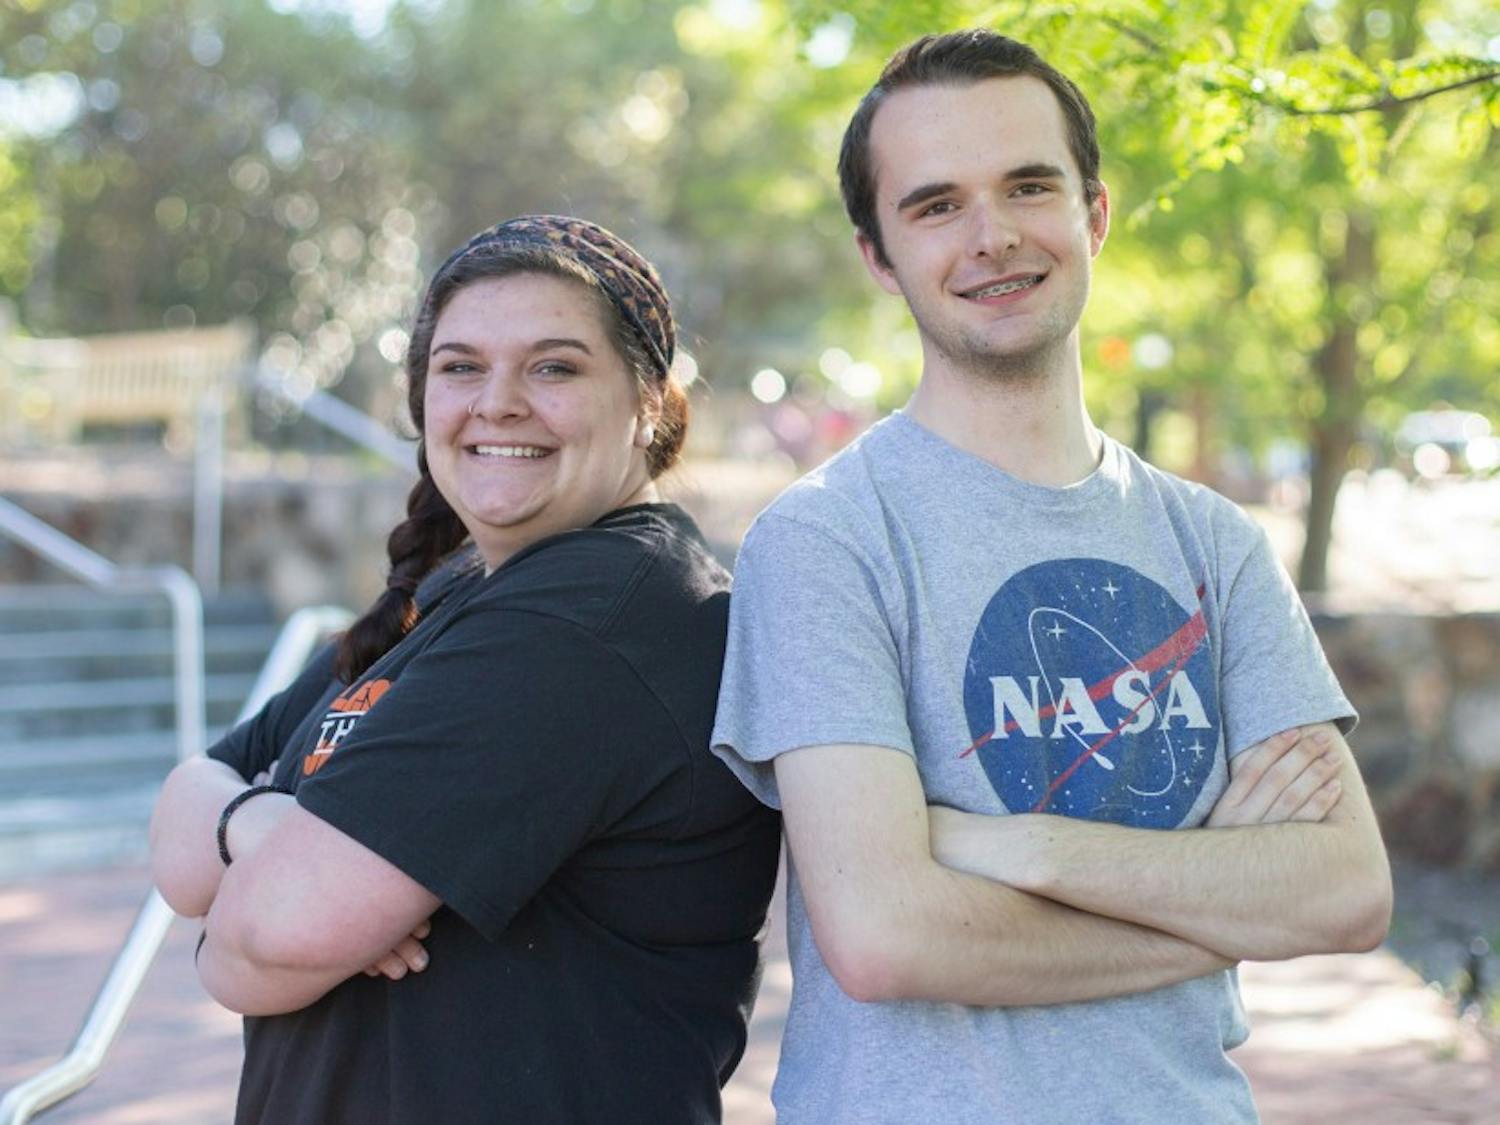 (From left to right) Mallory Ward, senior peace, war, and defense major, and Logan Anderson, first-year global studies major, pose on the steps of the FedEx Global Education Center, April 22, 2019. Ward, who is currently 20-years-old, started college at the same age as Ward who is currently 17-years-old.